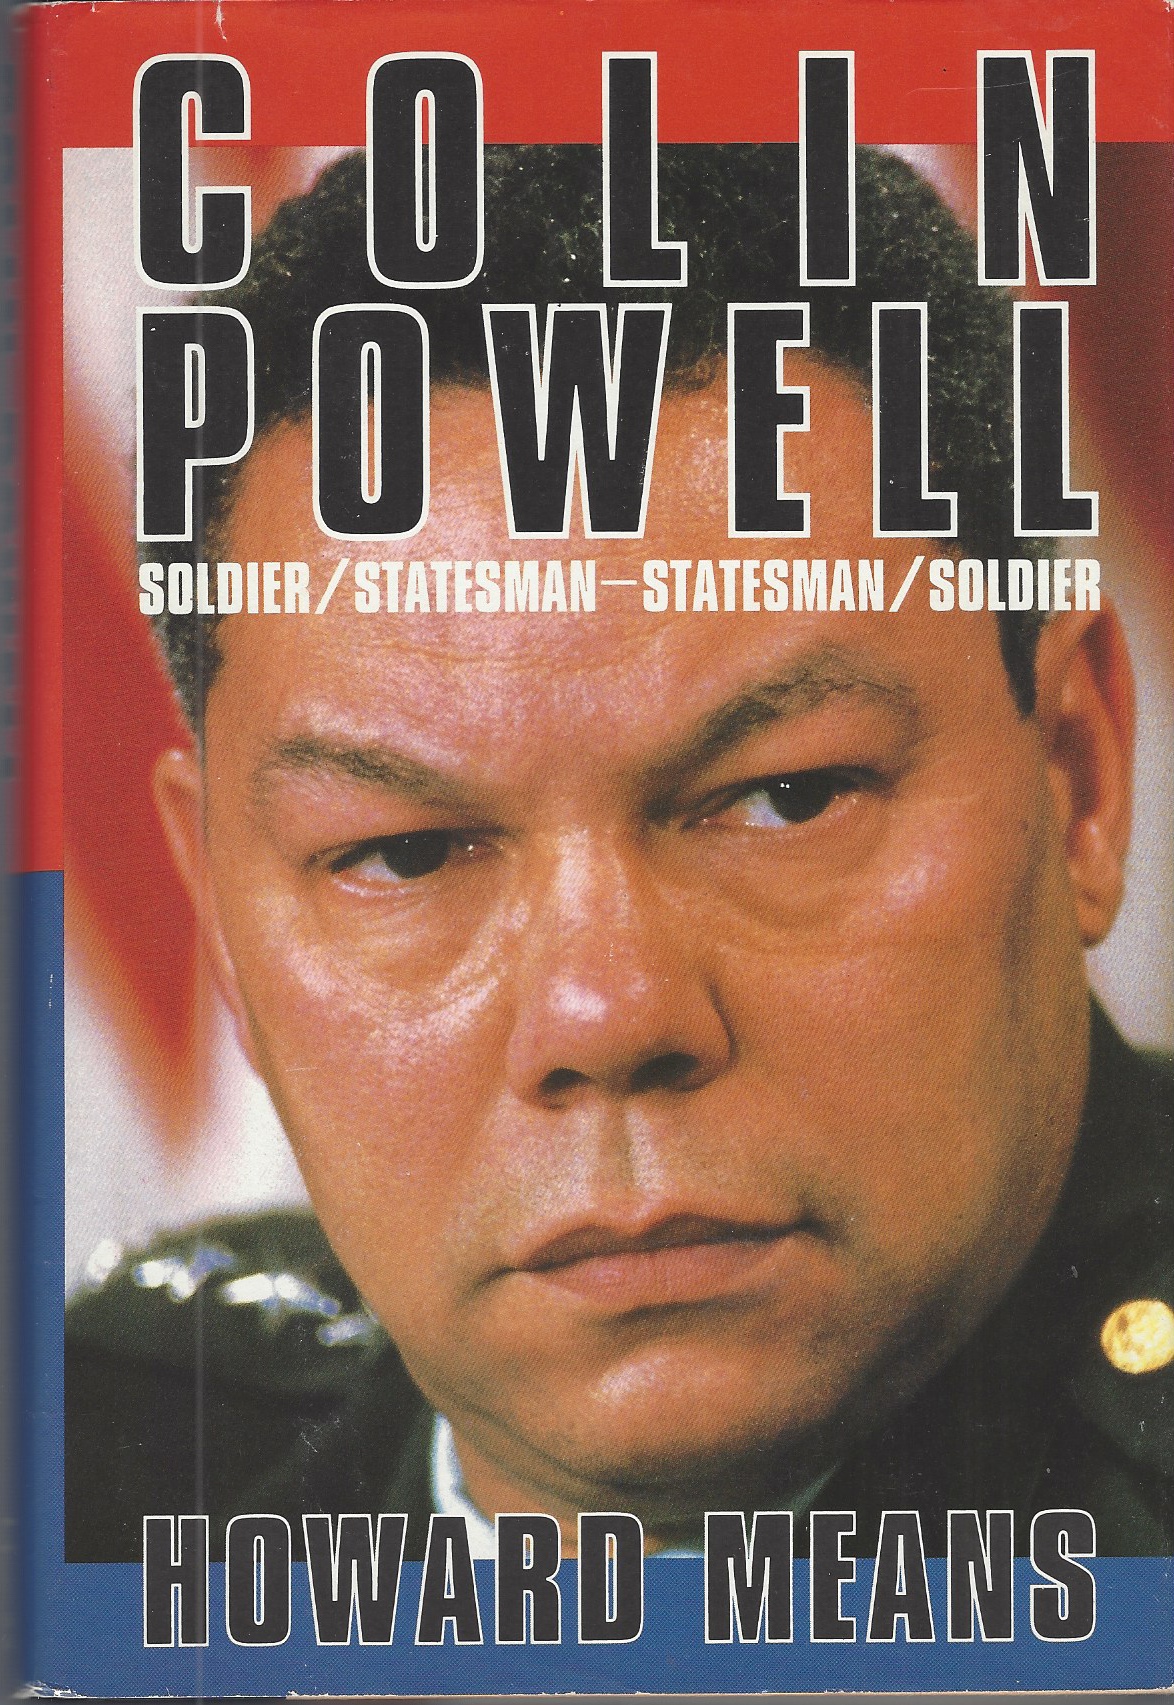 MEANS HOWARD - Colin Powell Soldier/Statesman-Statesman/Soldier